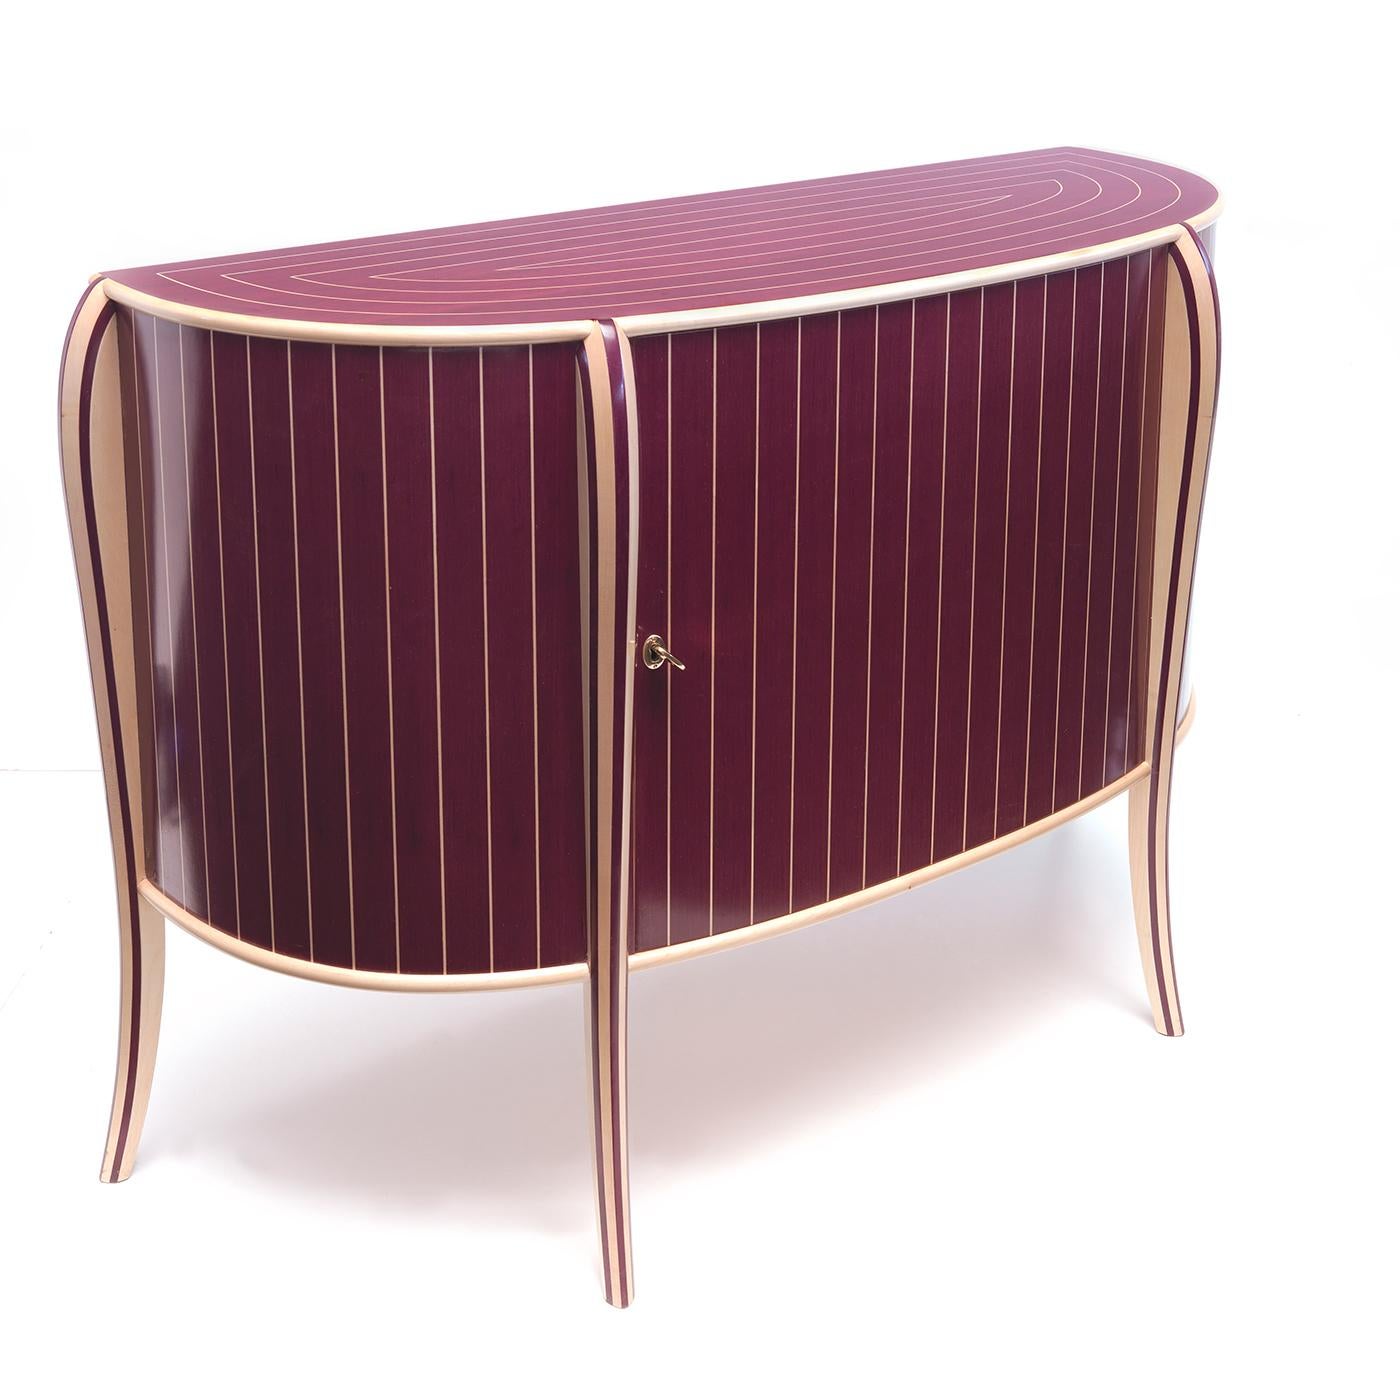 Representing high quality woodworking, this graceful sideboard made of two-tone, natural woods is defined by a semicircular silhouette enlivened by maple and Purpleheart marquetry. Sinuous thin elements with an alluring striped motif grace the front